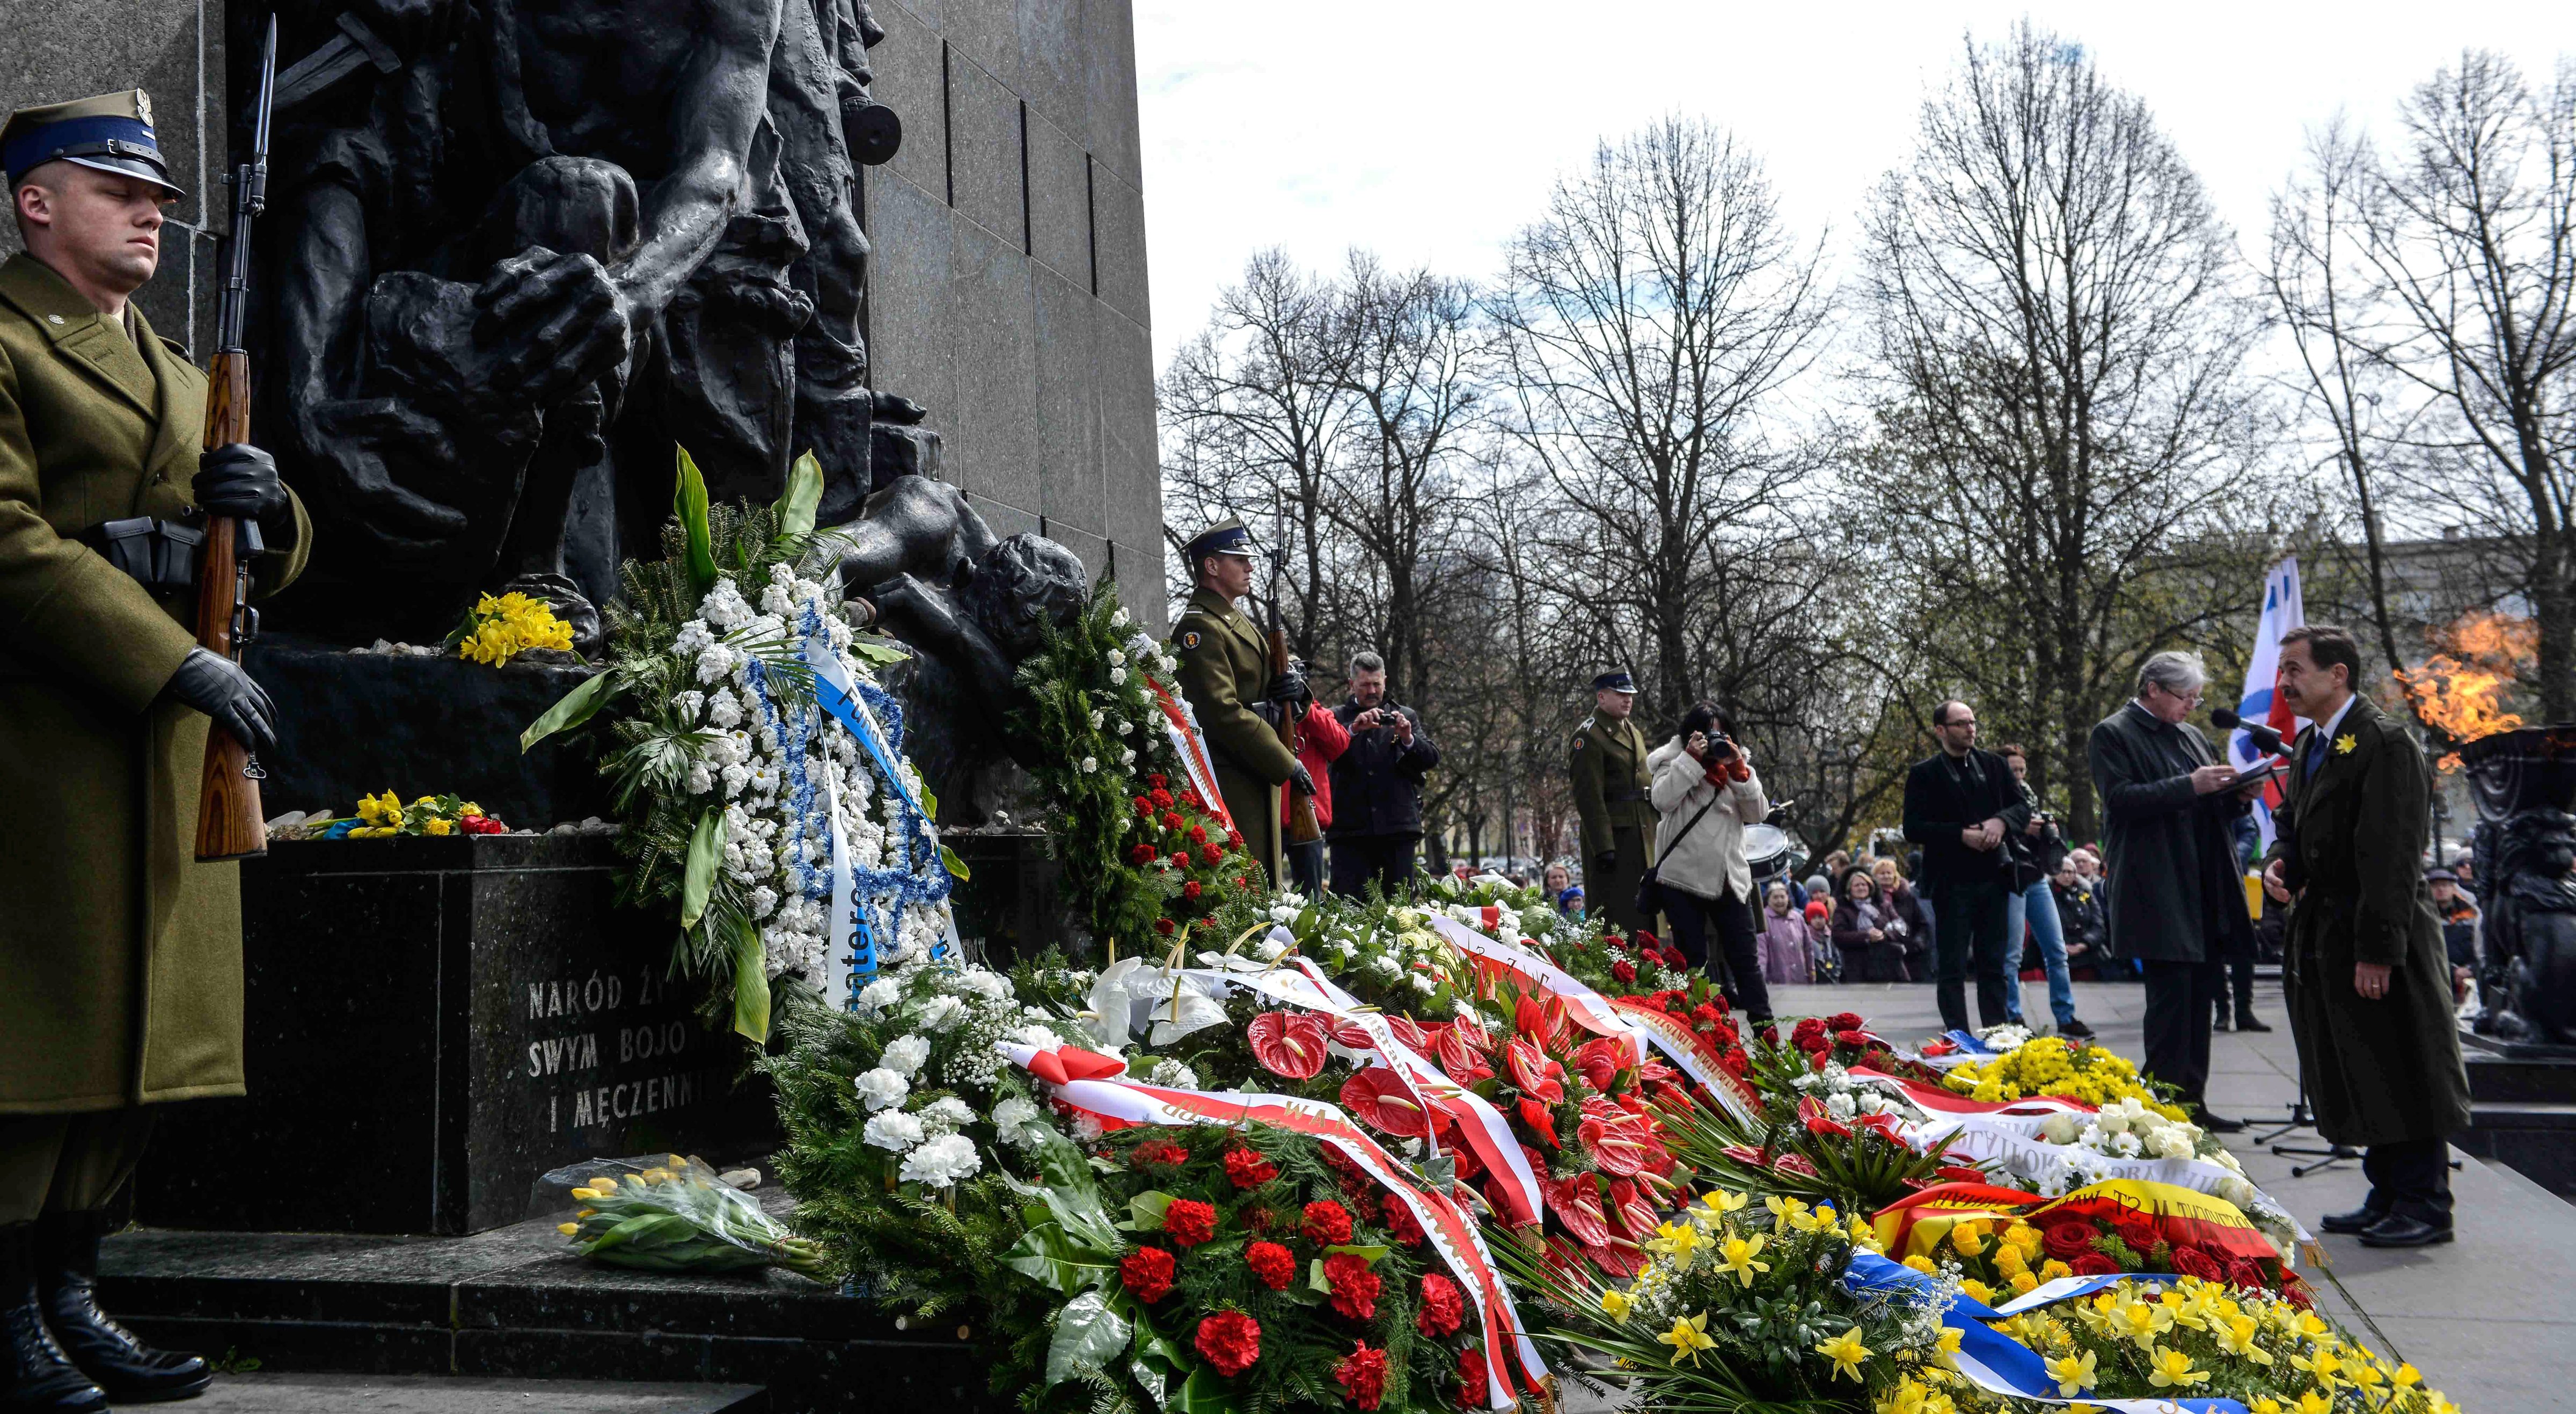 The 72nd anniversary of Warsaw Ghetto Uprising